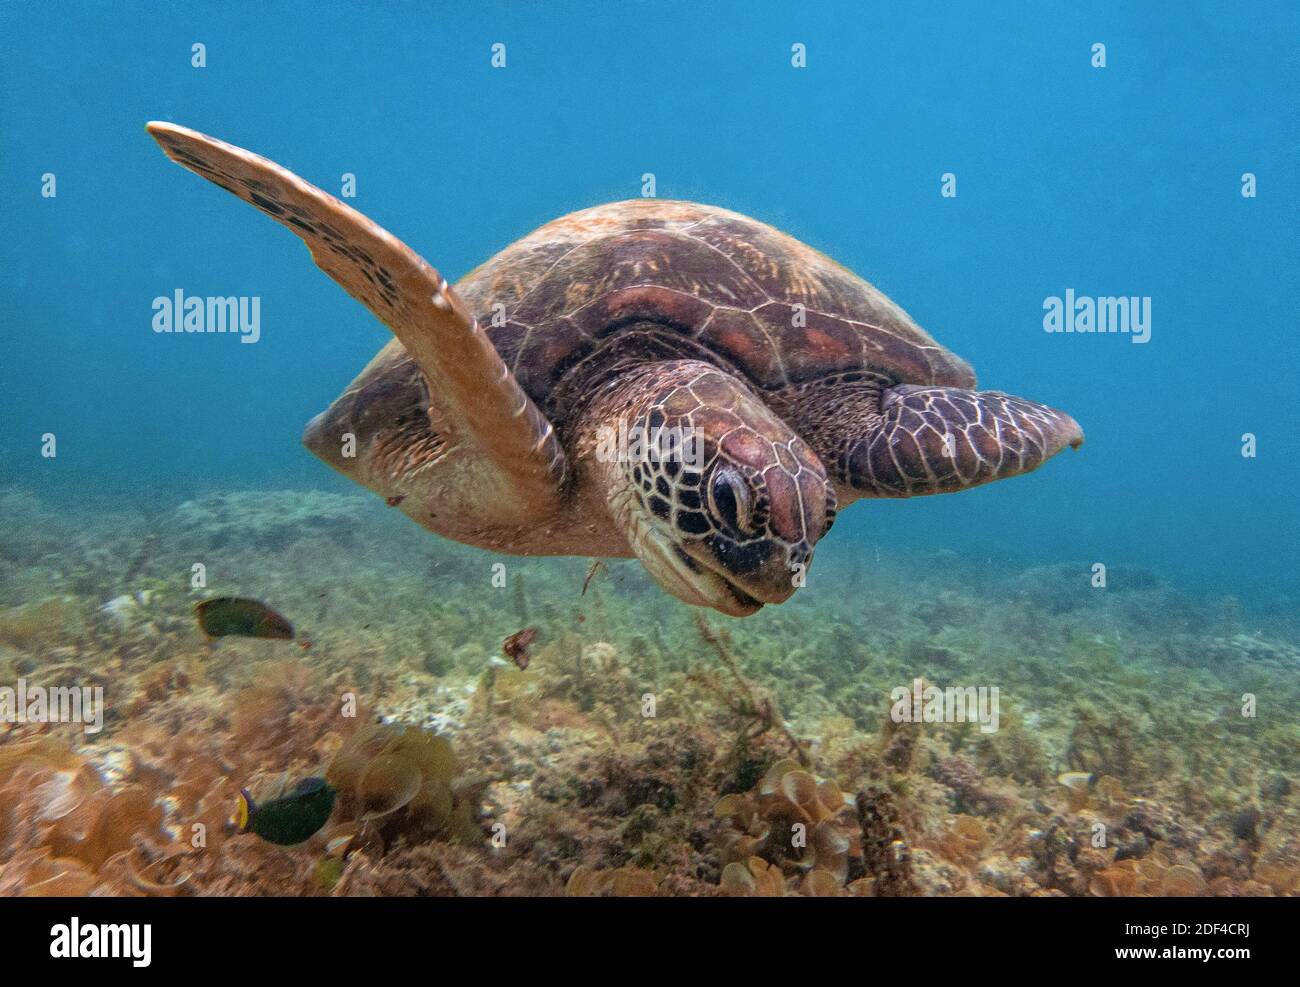 Green sea turtle (Chelonia mydas) off Siquijor Island in the Philippines in February 2020. Photo by Christophe Geyres/ABACAPRESS.COM Stock Photo